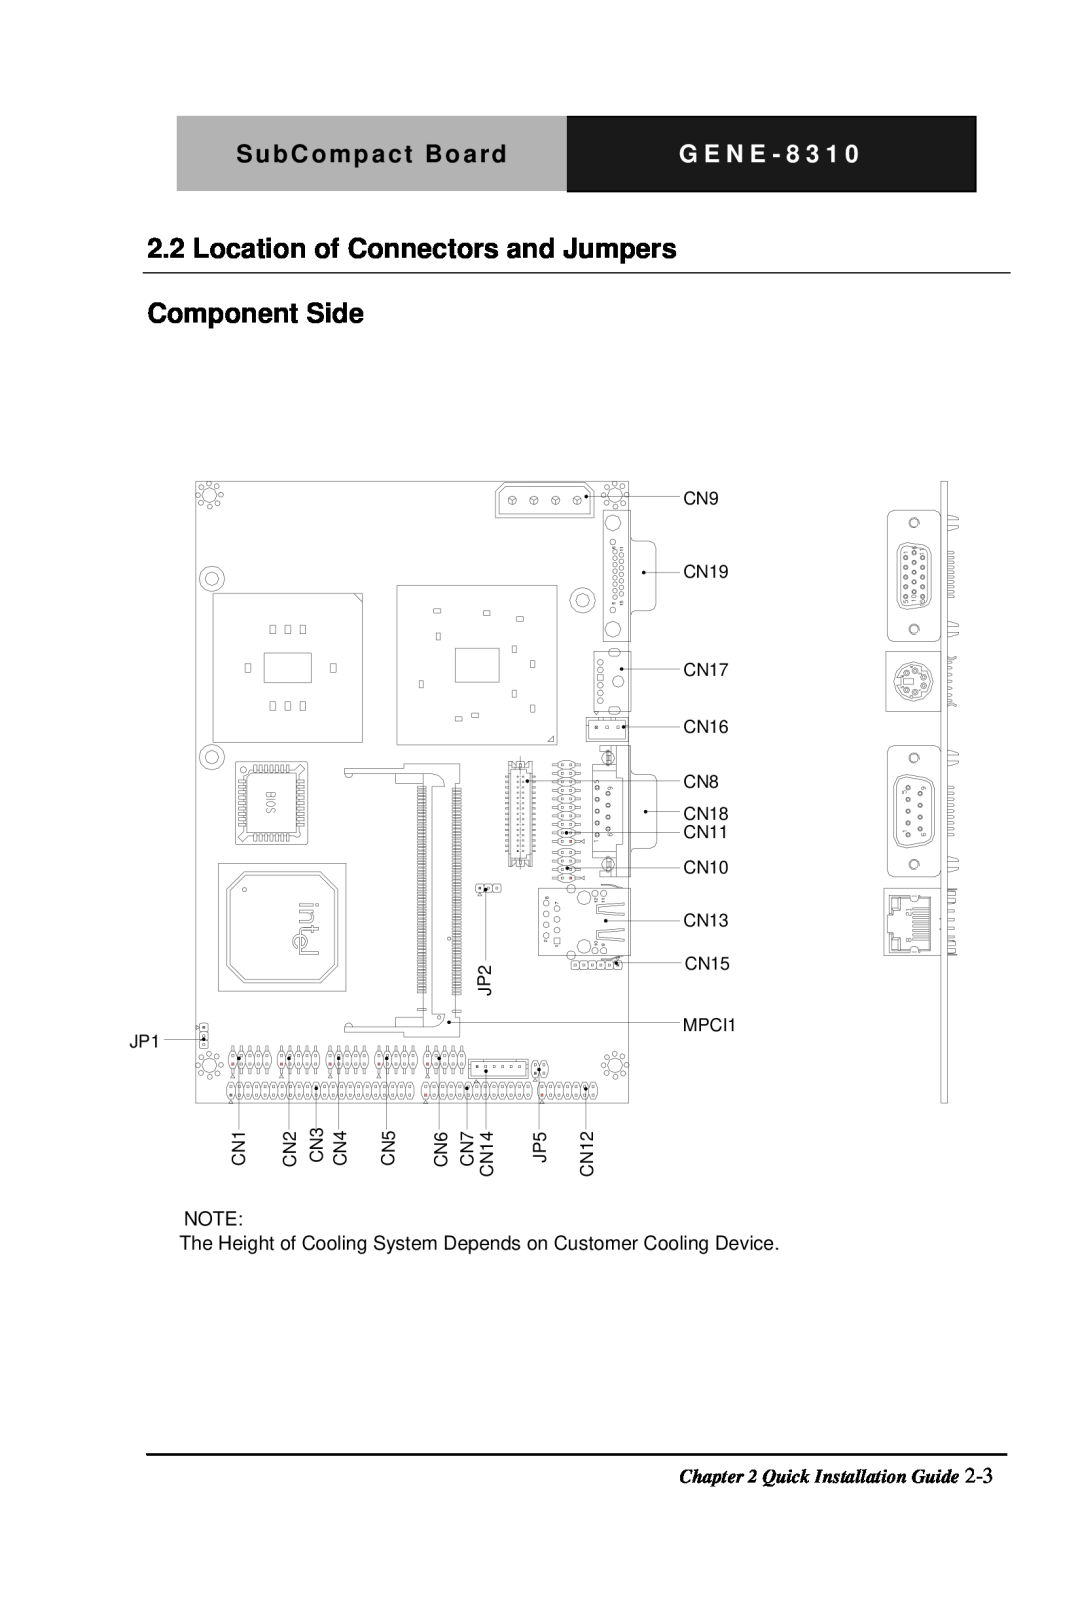 Intel GENE-8310 manual Location of Connectors and Jumpers Component Side, SubCompact Board, G E N E - 8 3 1 